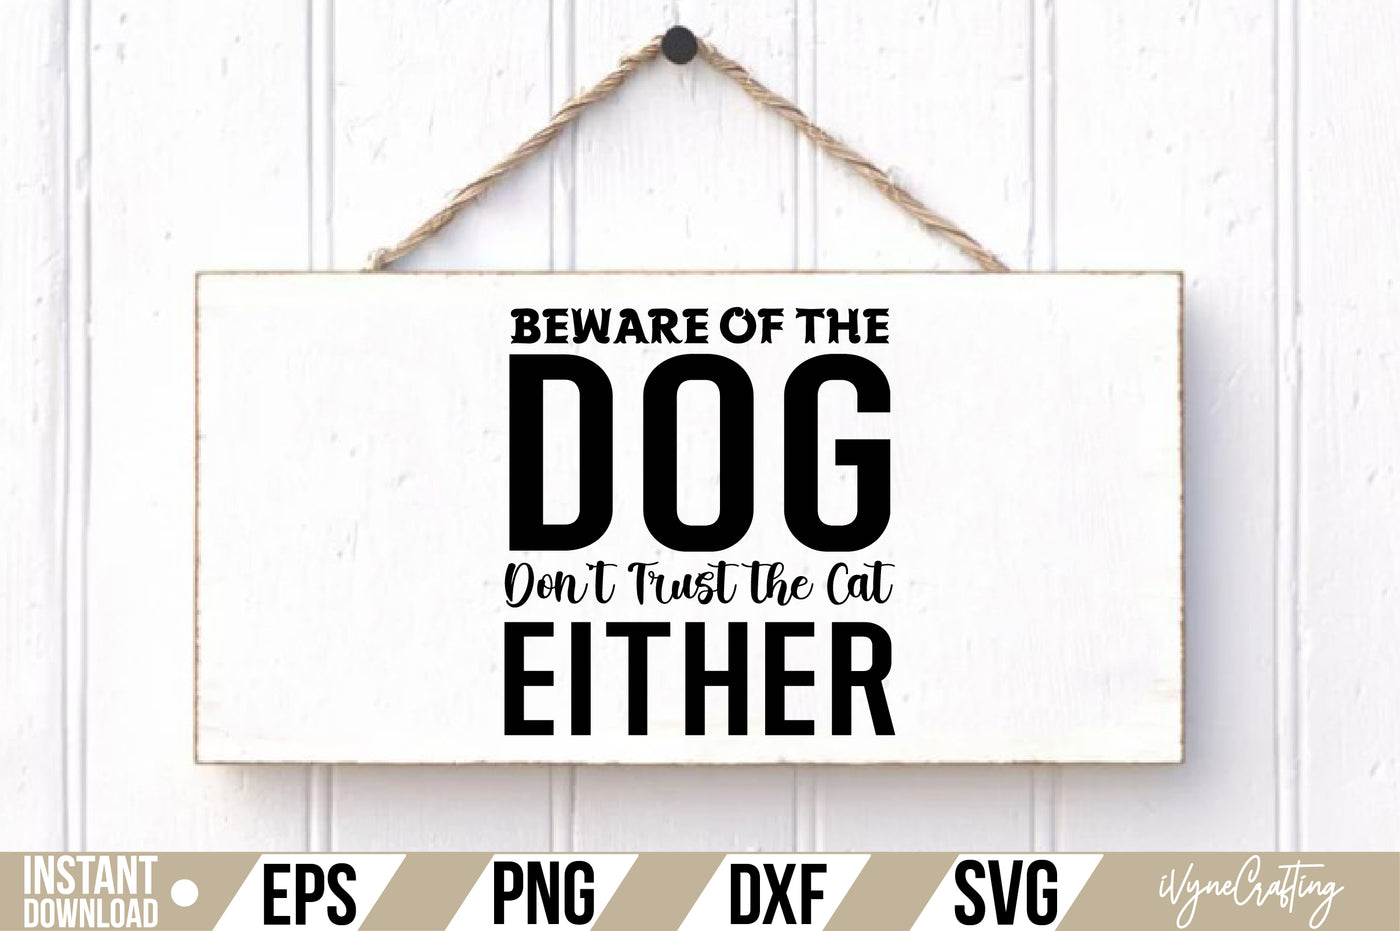 Beware of the Dog, Don't Trust the Cat Either SVG Cut File